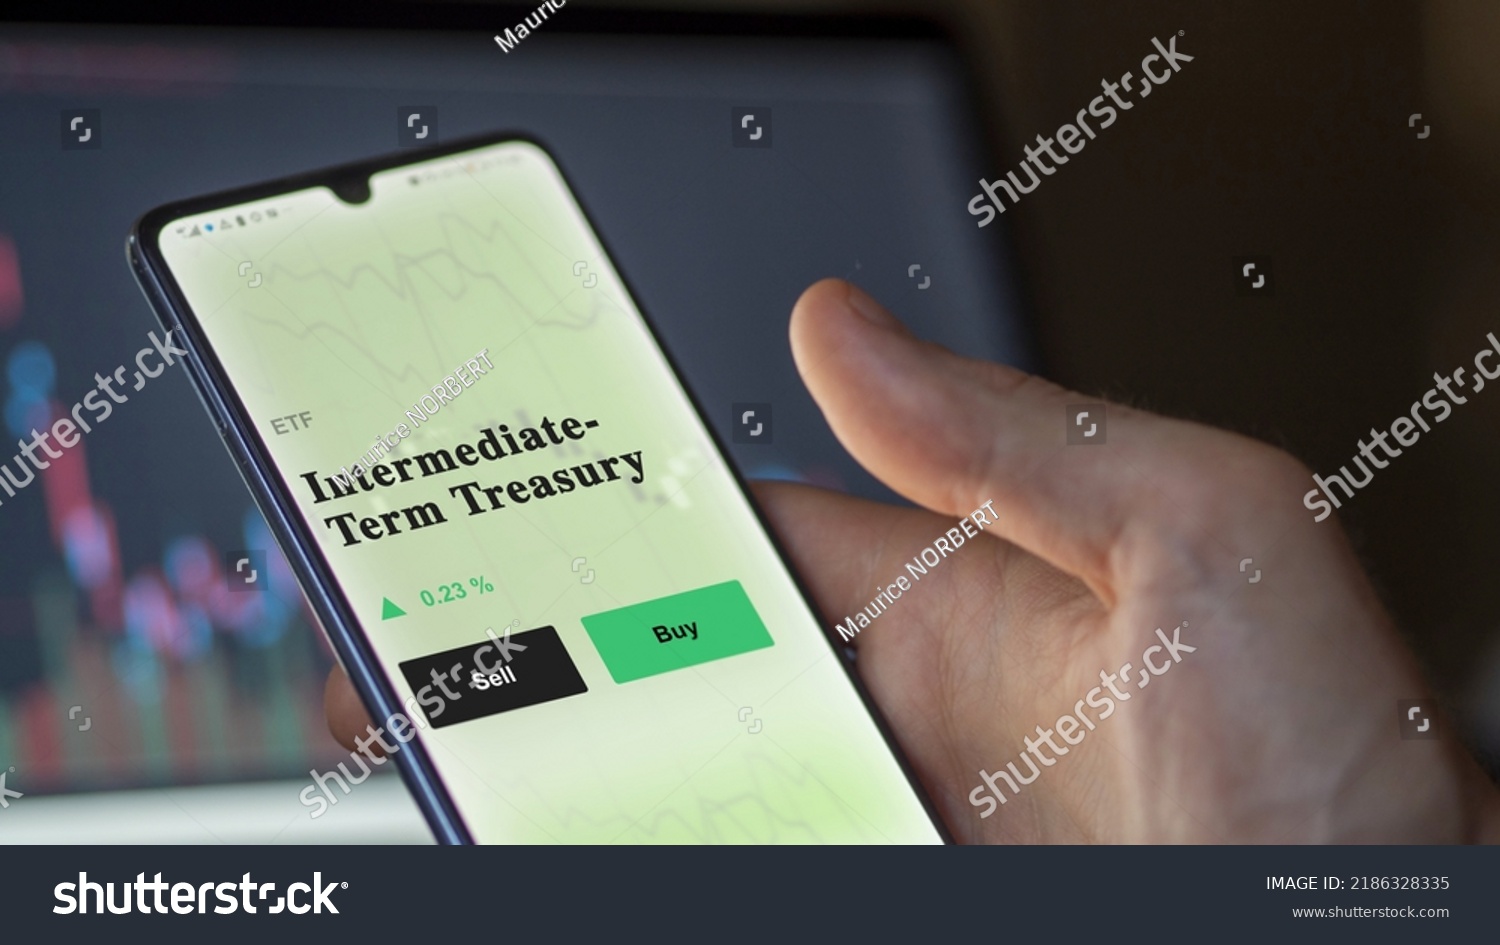 An investor's analyzing the intermediate-term treasury etf fund on a screen. A phone shows the prices of Intermediate-Term Treasury #2186328335